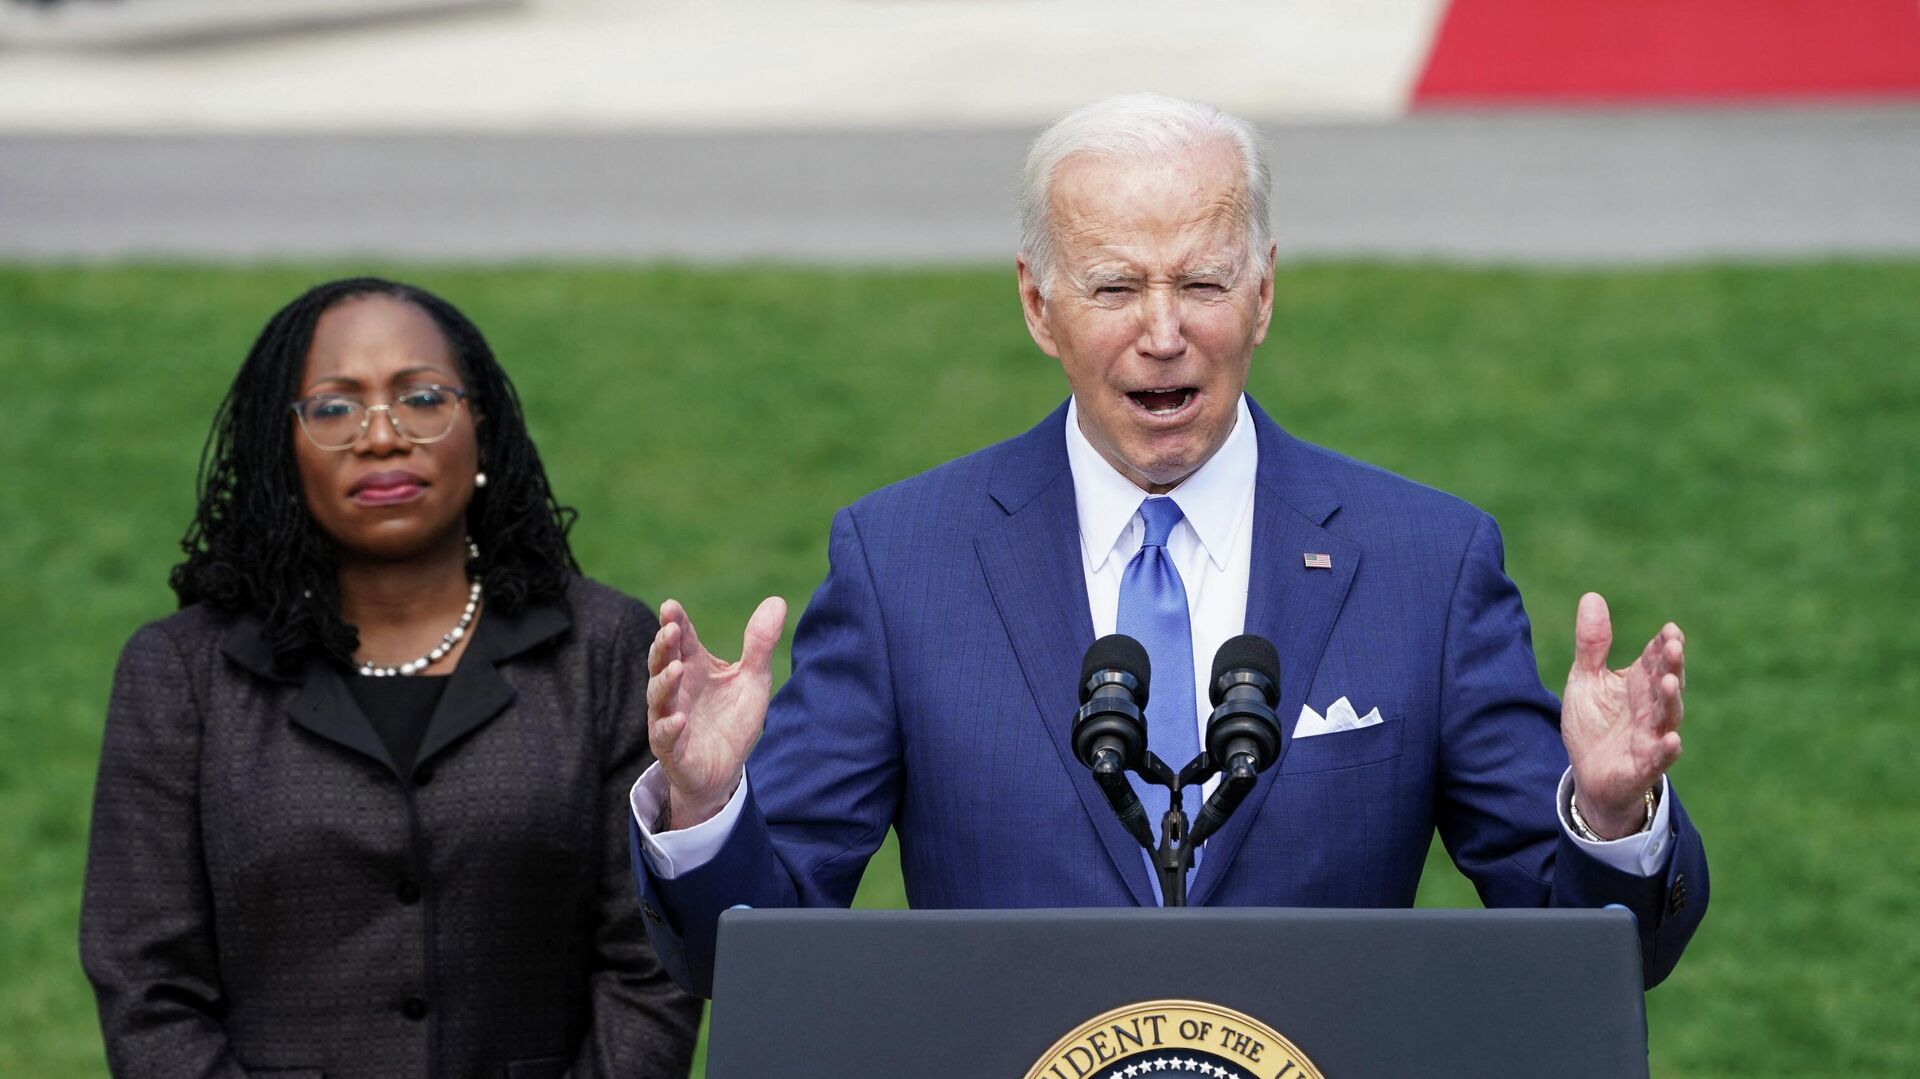 U.S. President Joe Biden delivers remarks on Judge Ketanji Brown Jackson’s confirmation as the first Black woman to serve on the U.S. Supreme Court, as she stands at his side during a celebration event on the South Lawn at the White House in Washington, U.S., April 8, 2022. - Sputnik International, 1920, 09.04.2022